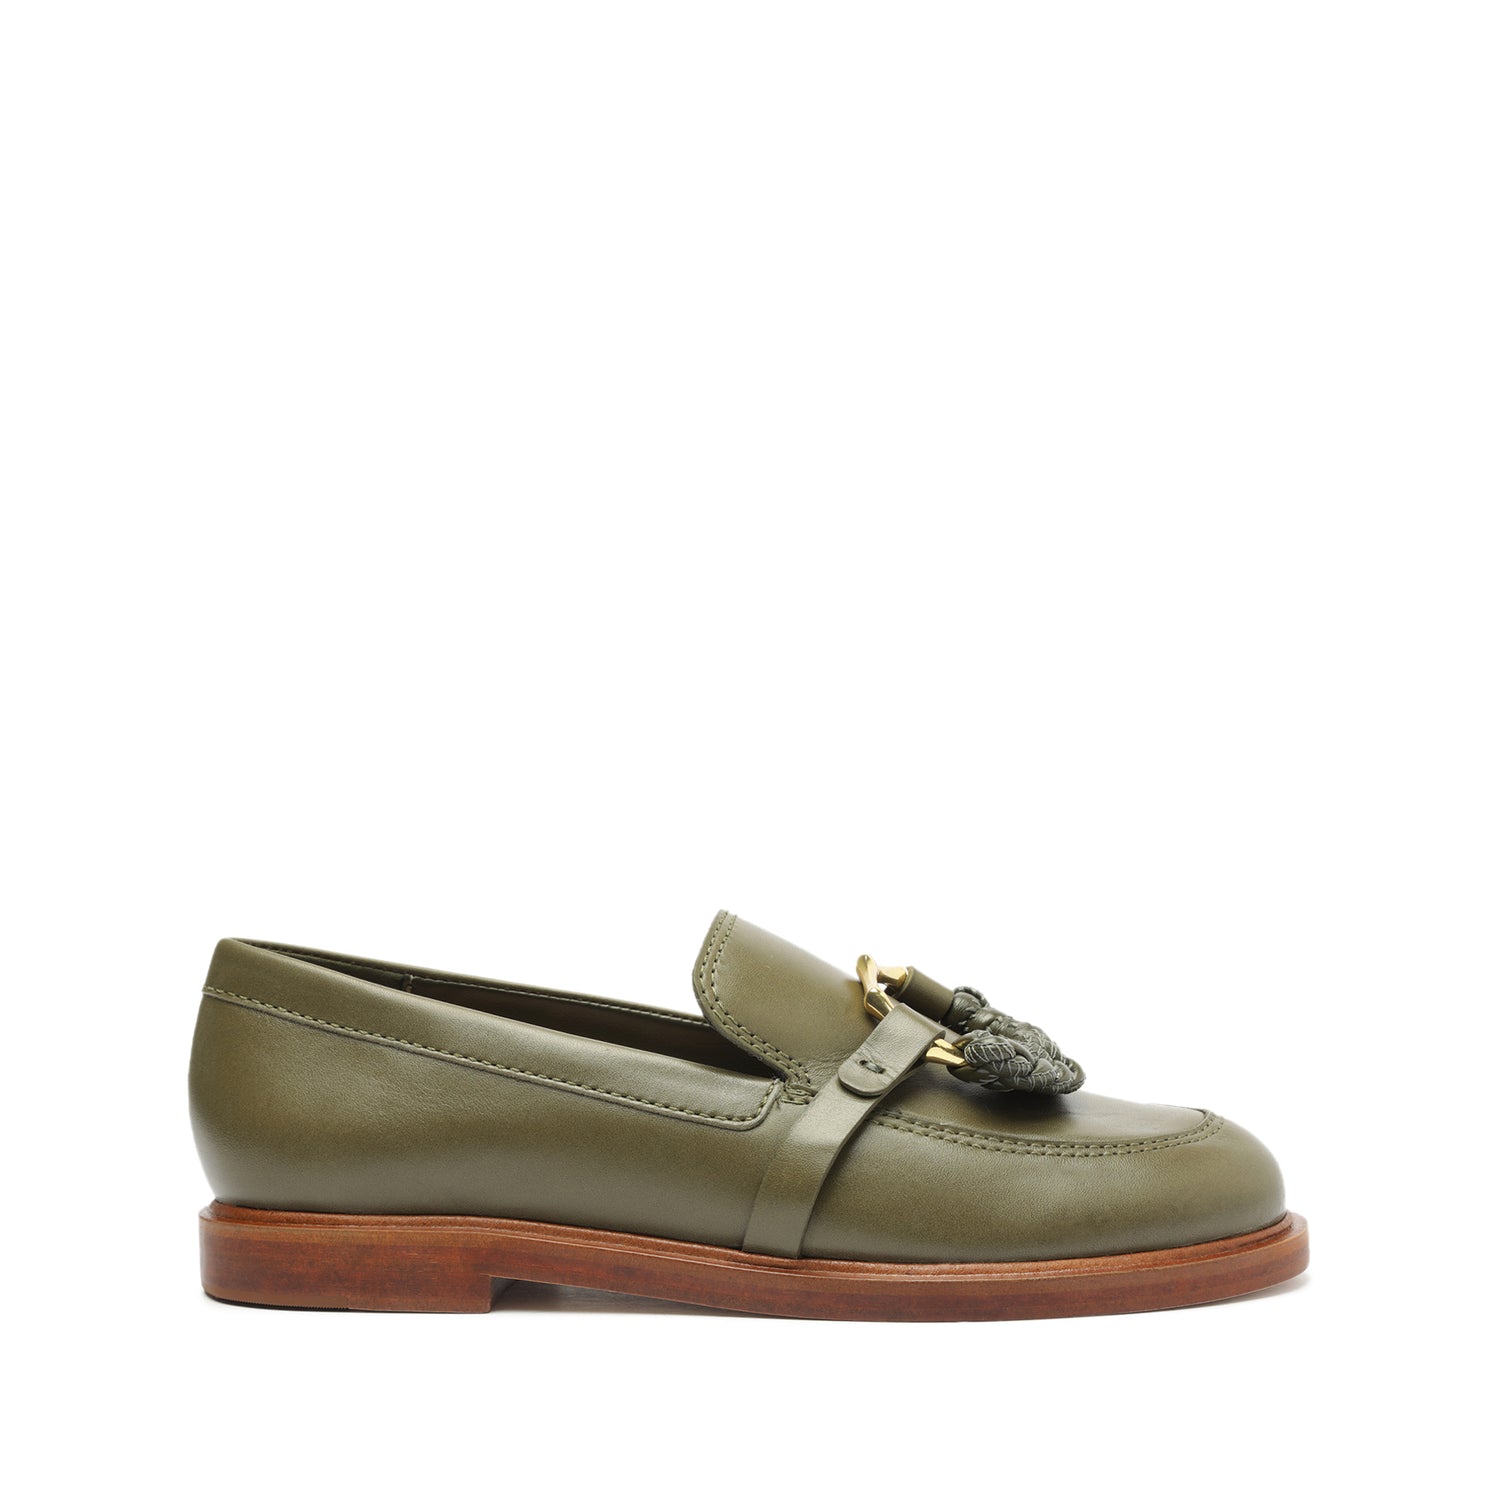 Rhino Leather Flat Flats Pre Fall 23 5 Military Green Leather - Schutz Shoes